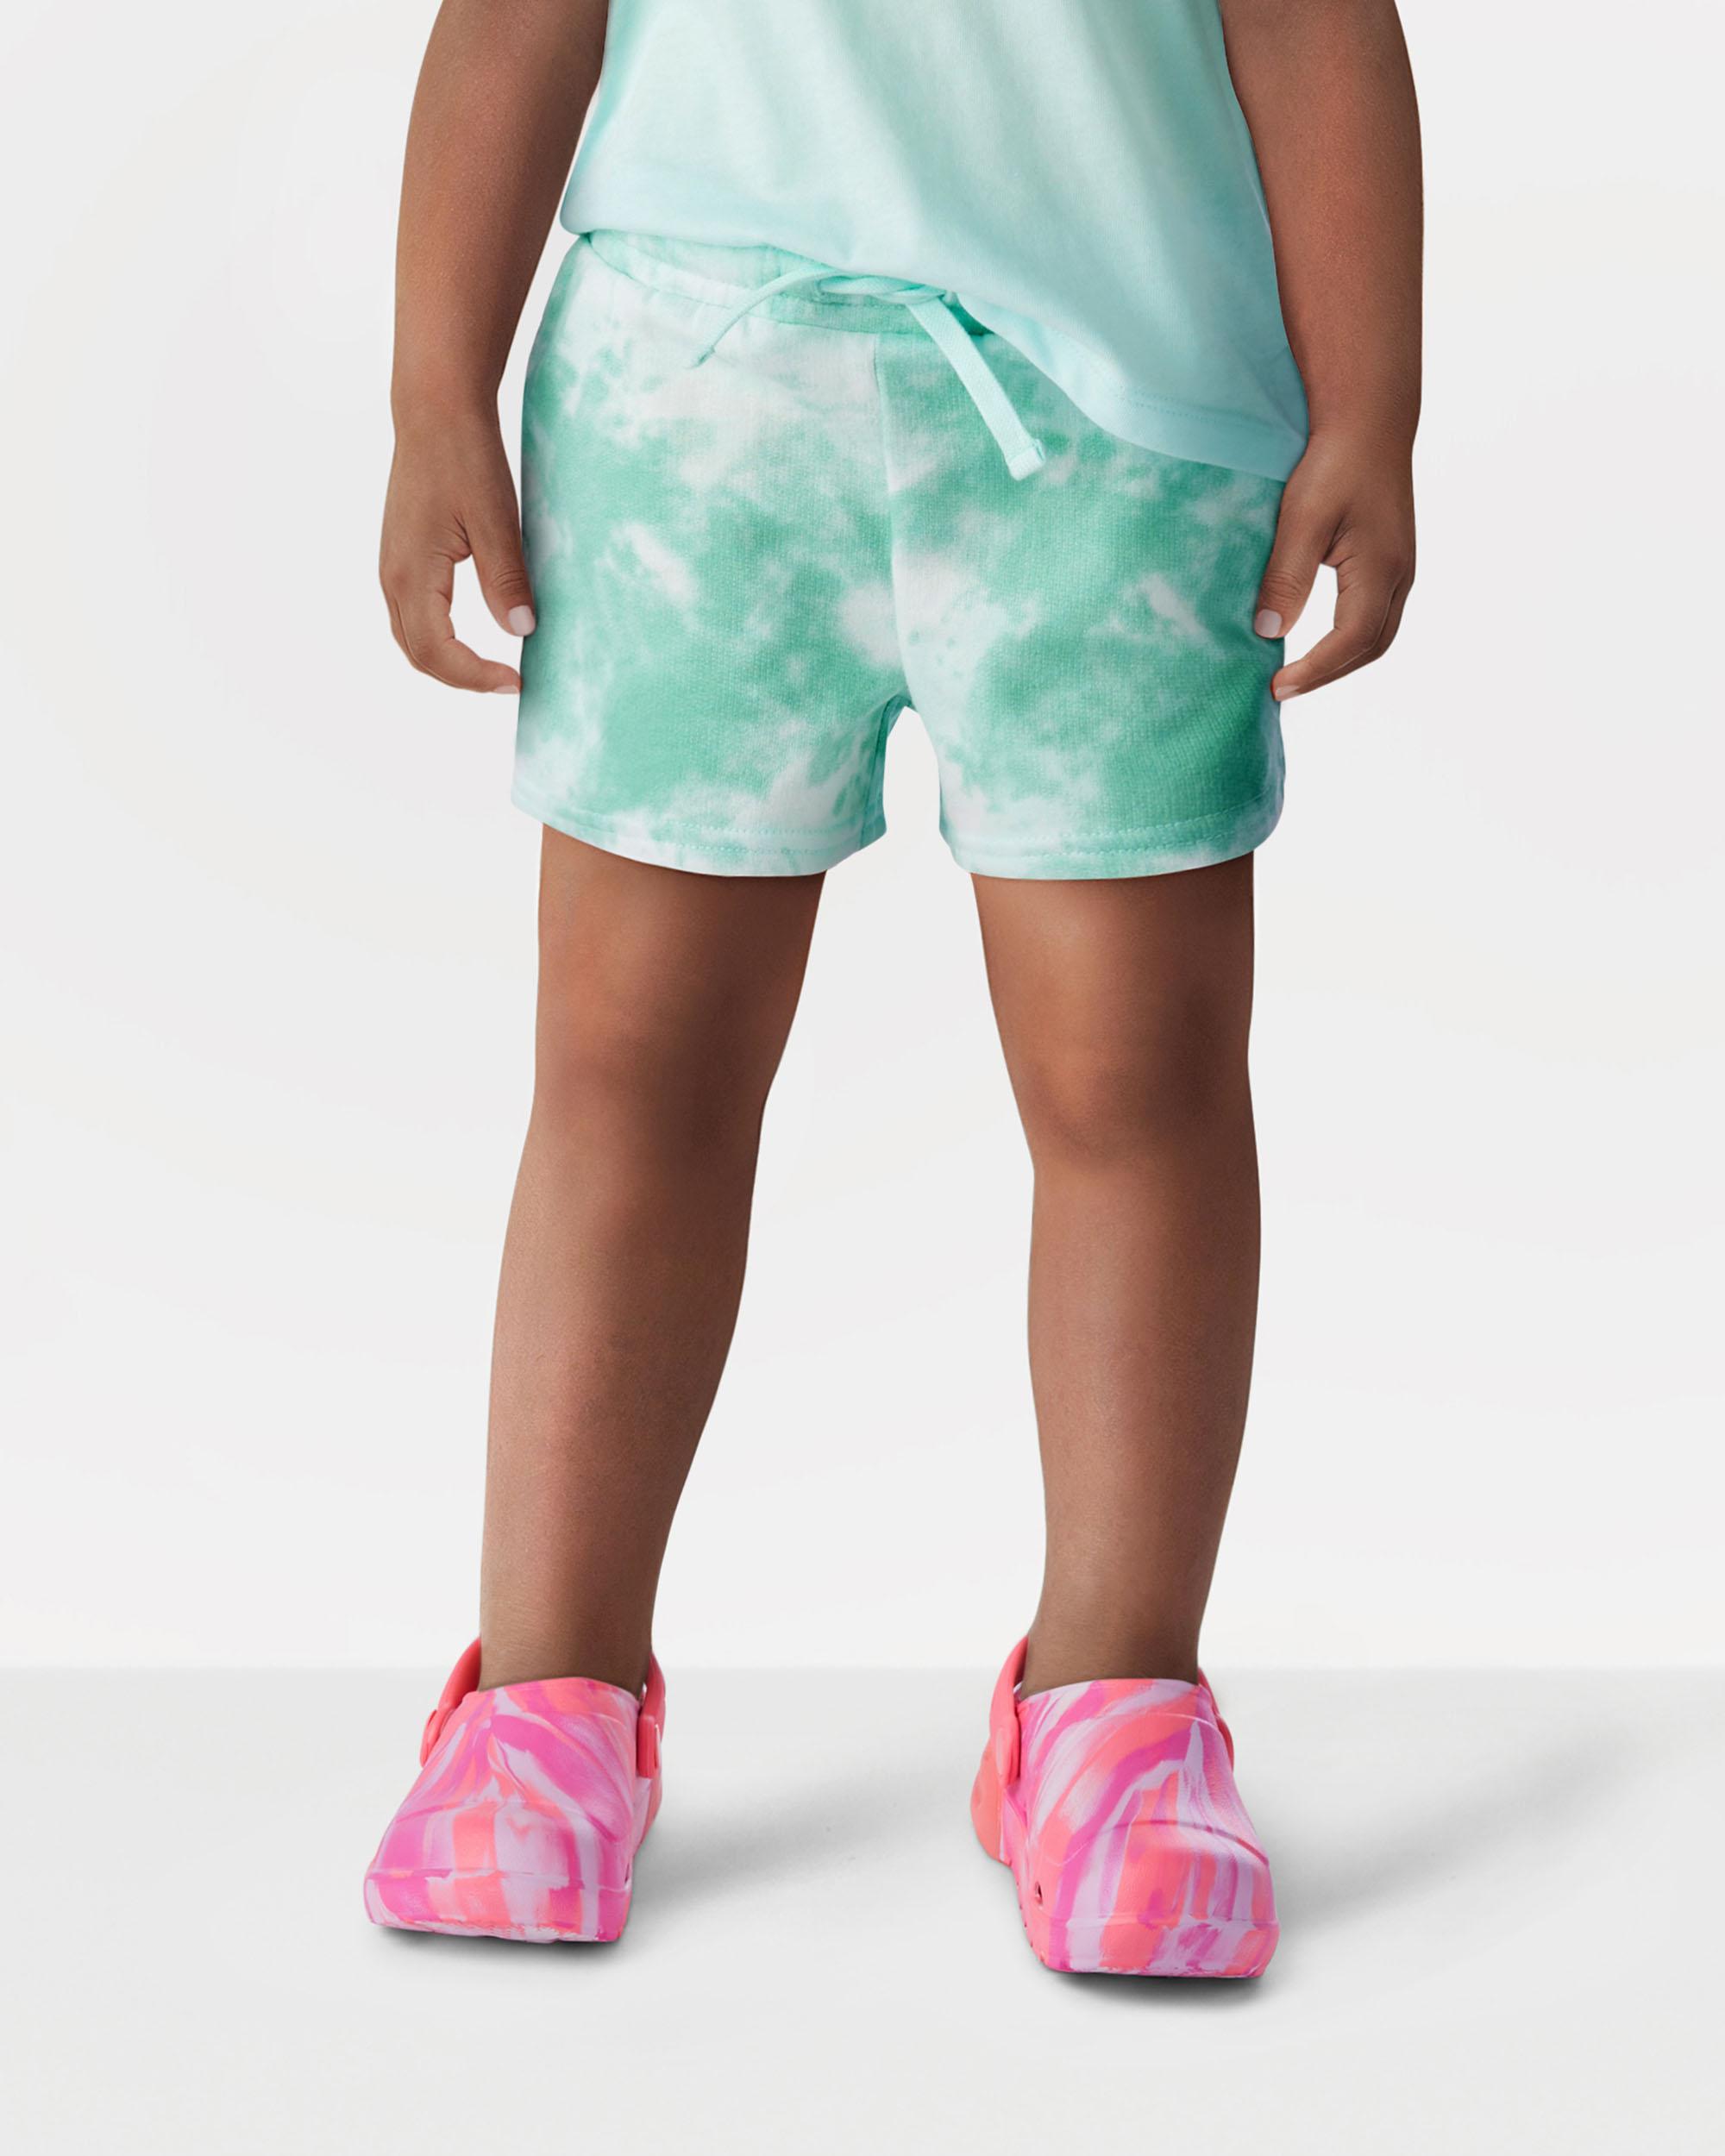 Toddler Tie-Dye Pull-On French Terry Shorts